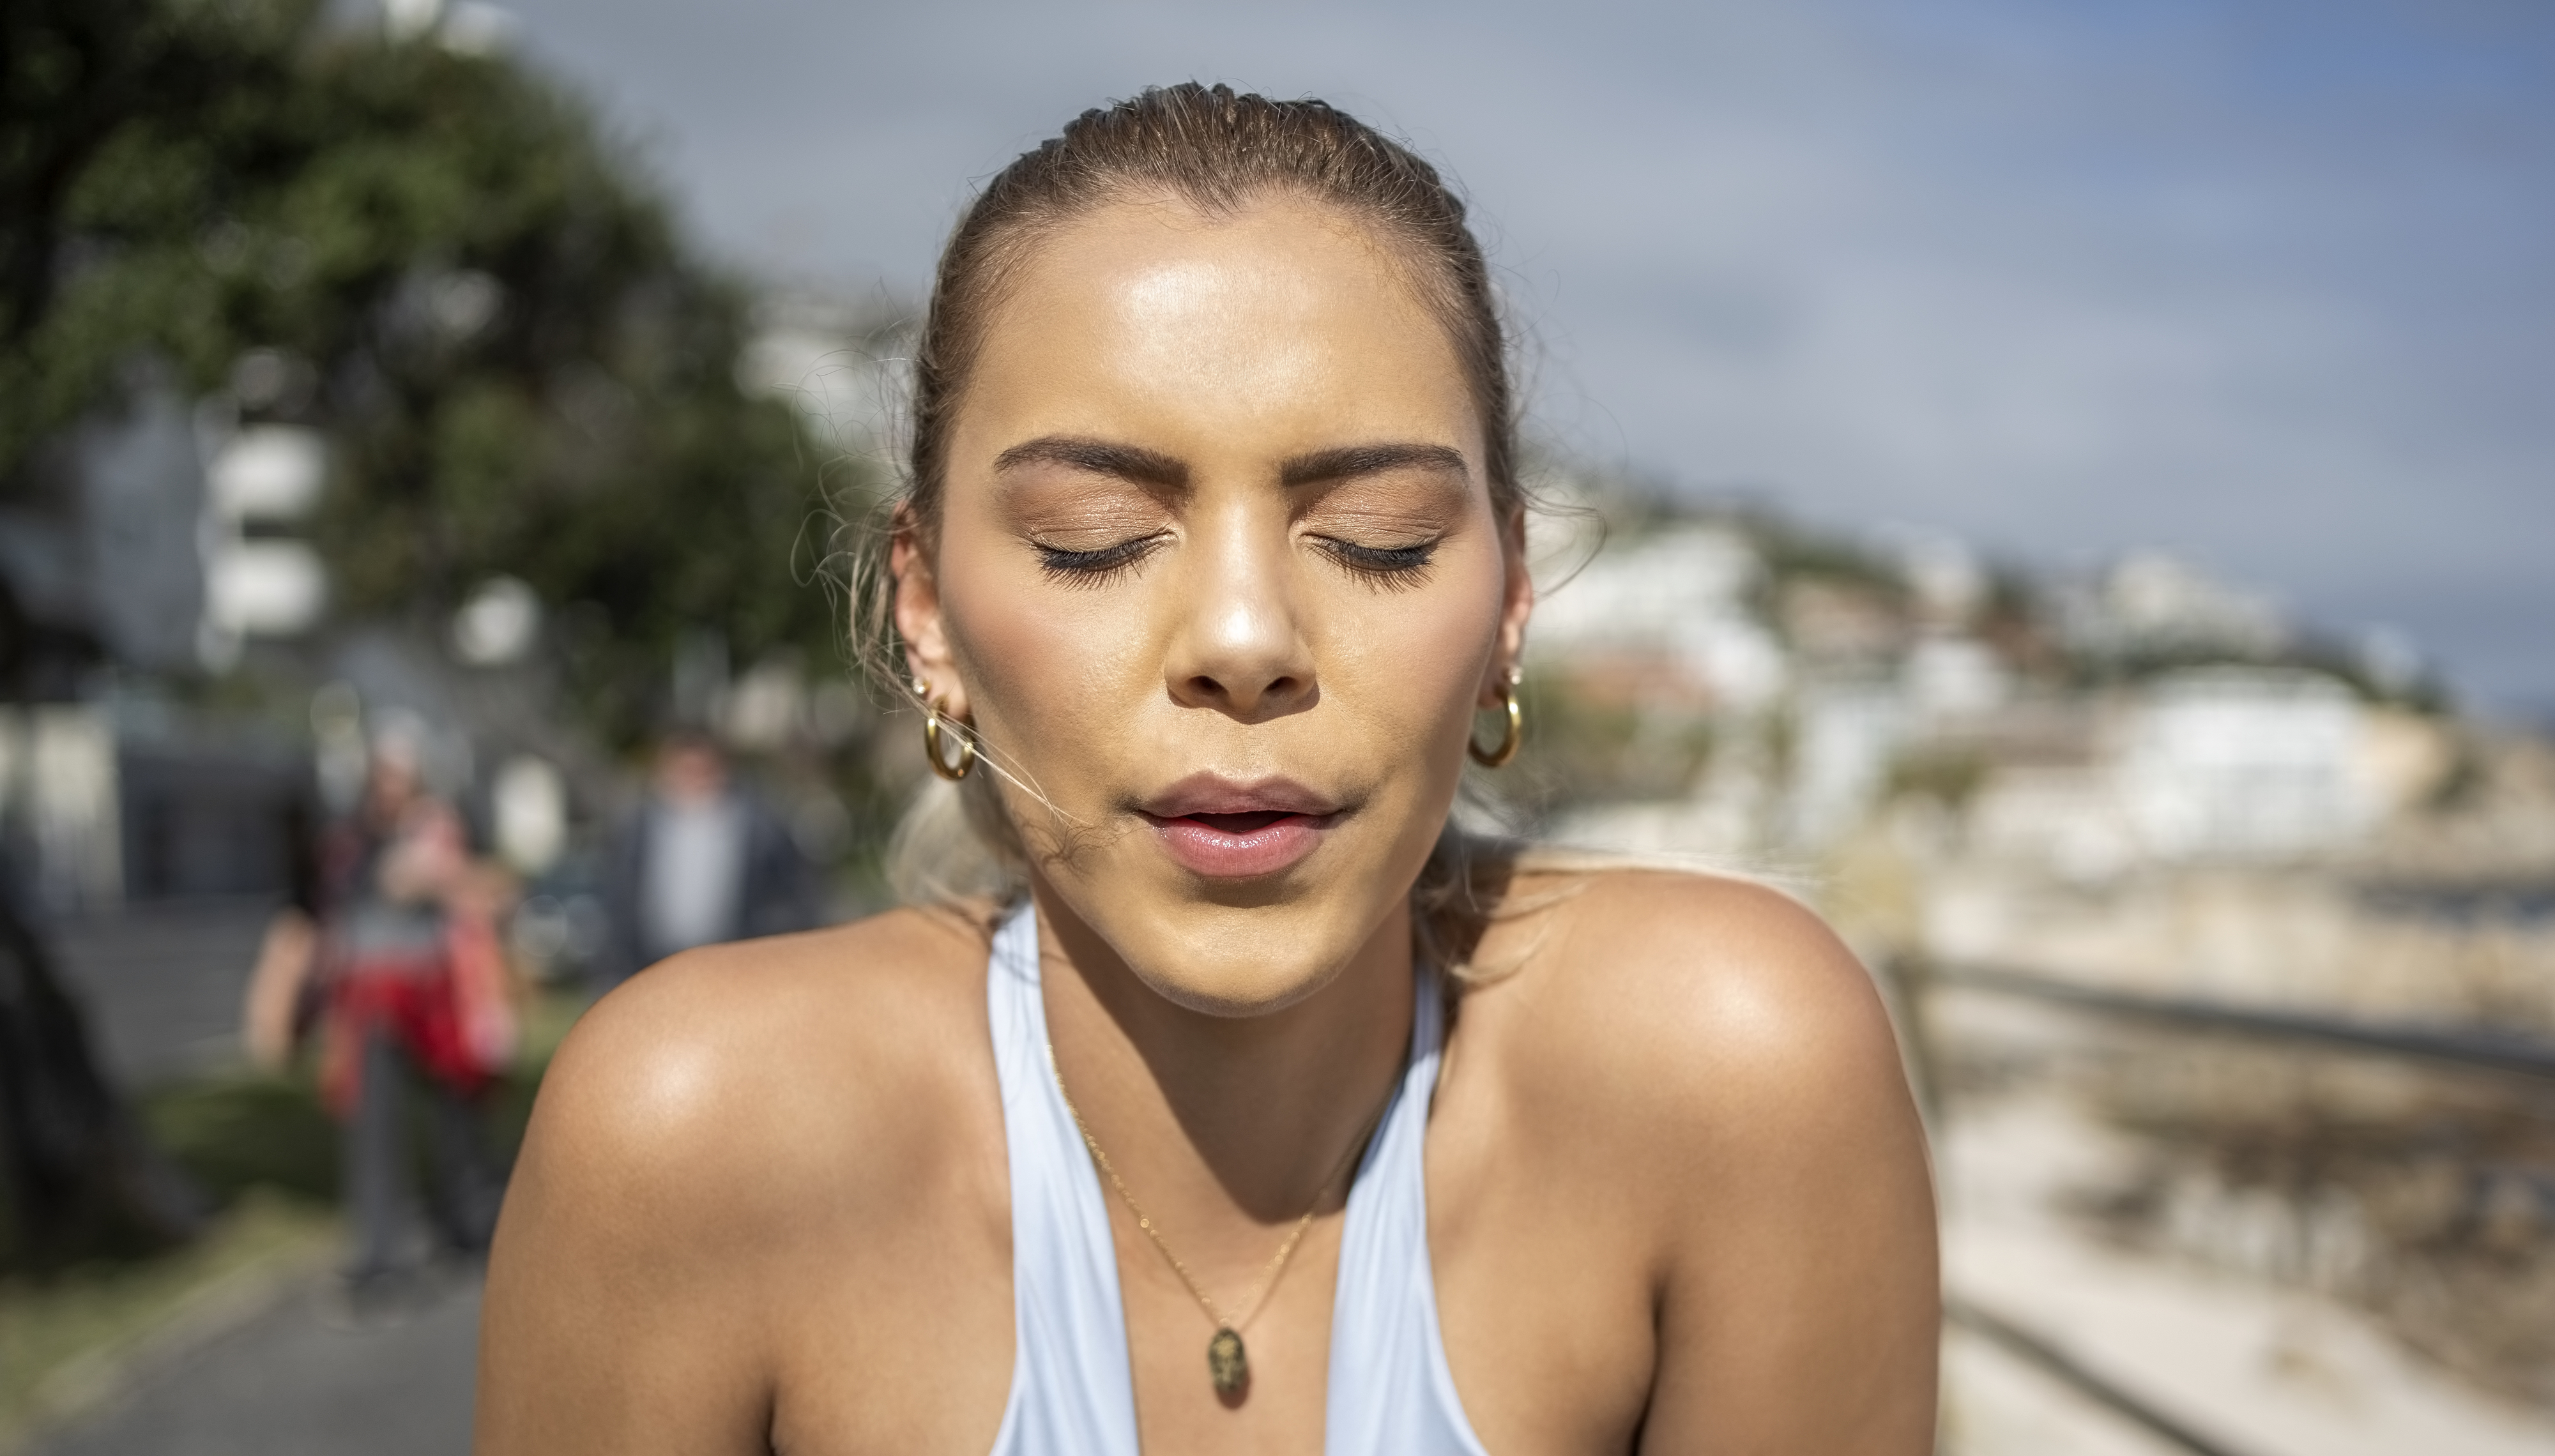 Woman with closed eyes wearing earbuds takes a deep breath outdoors, suggesting relaxation or meditation